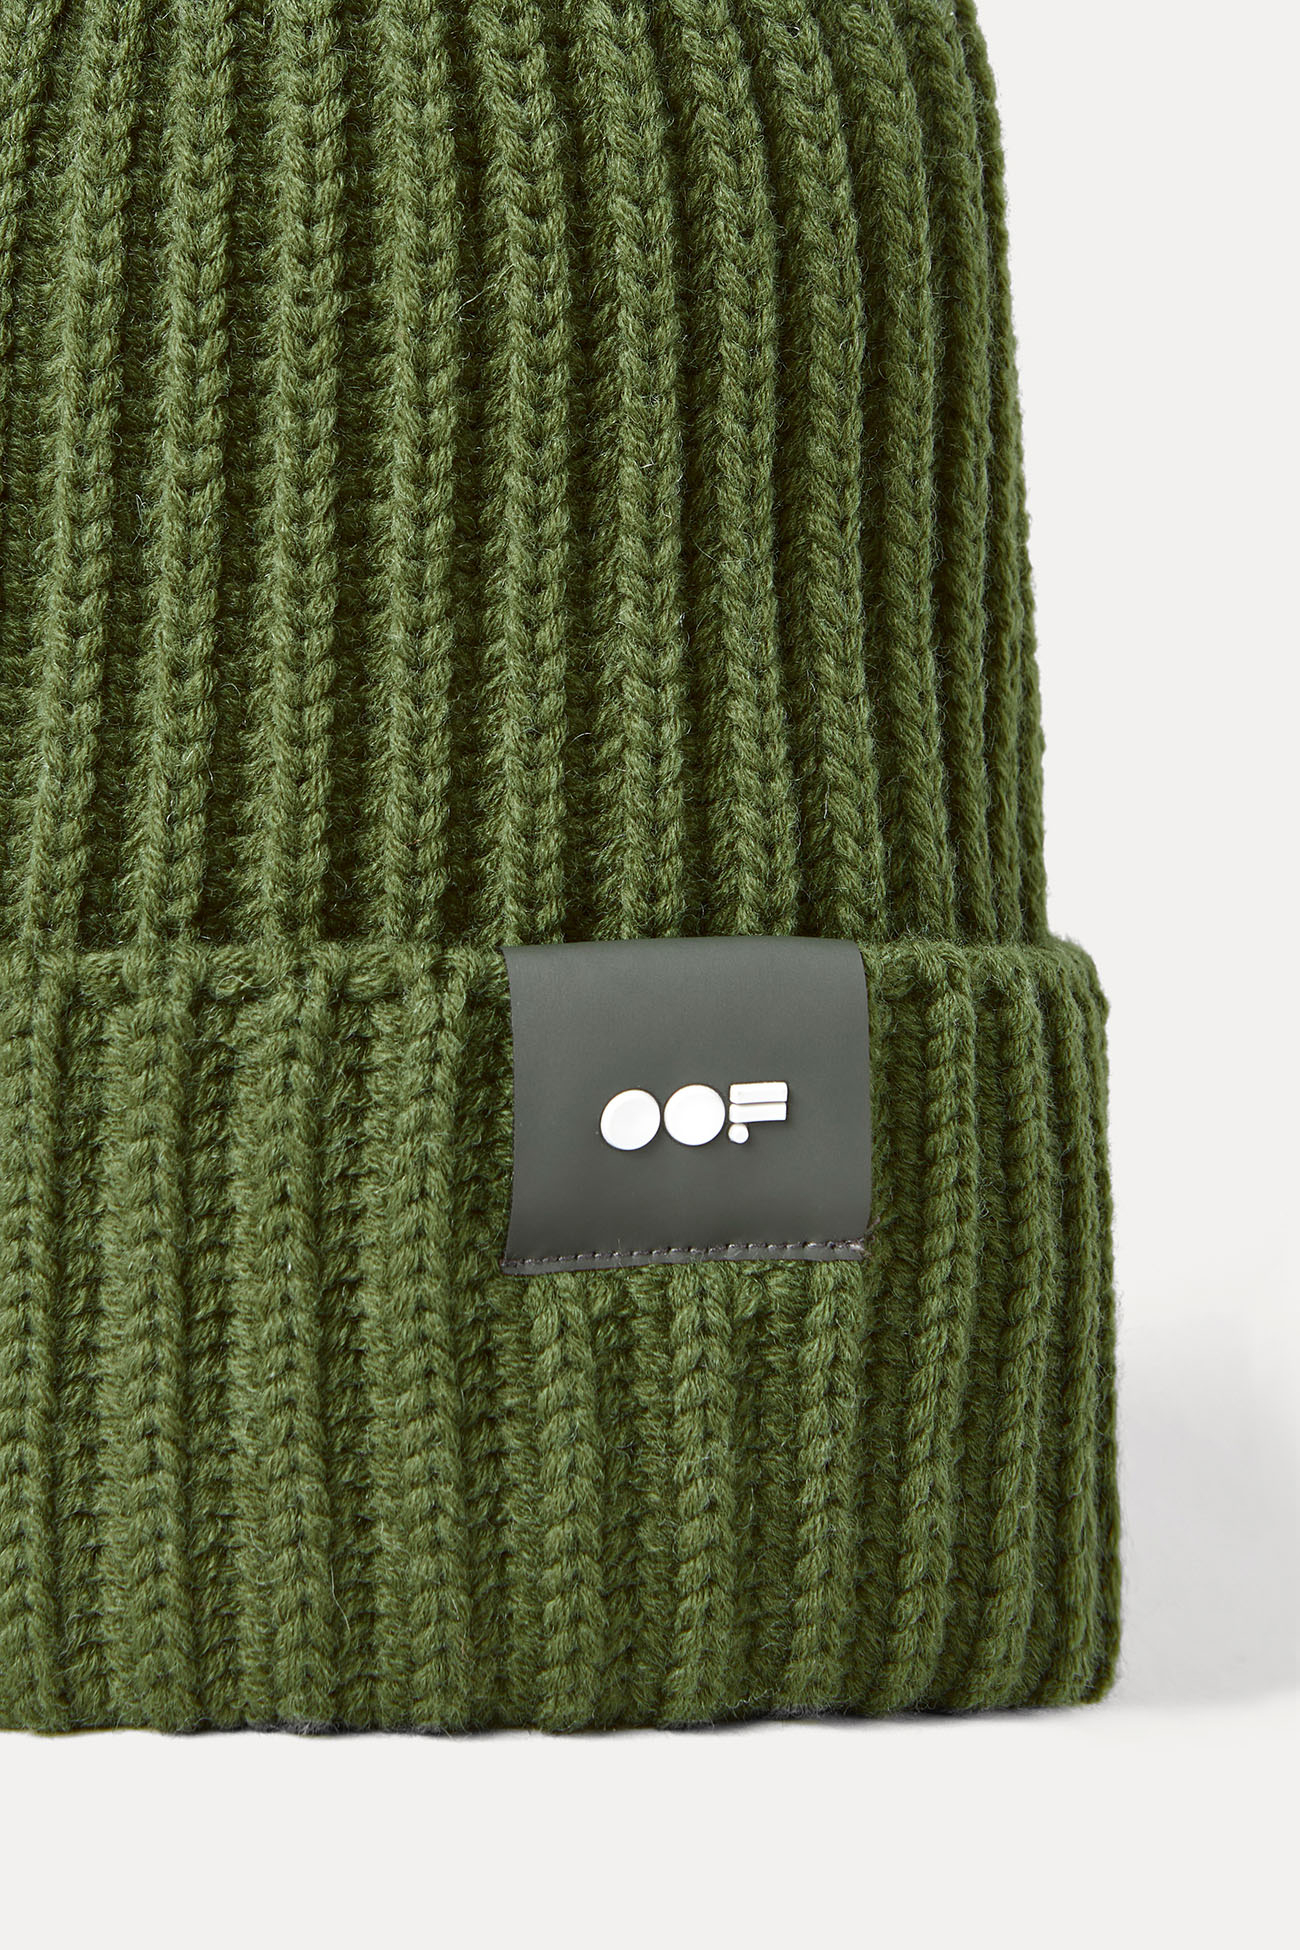 HAT 3013 MADE IN KNITTED WOOL - ARMY GREEN - OOF WEAR